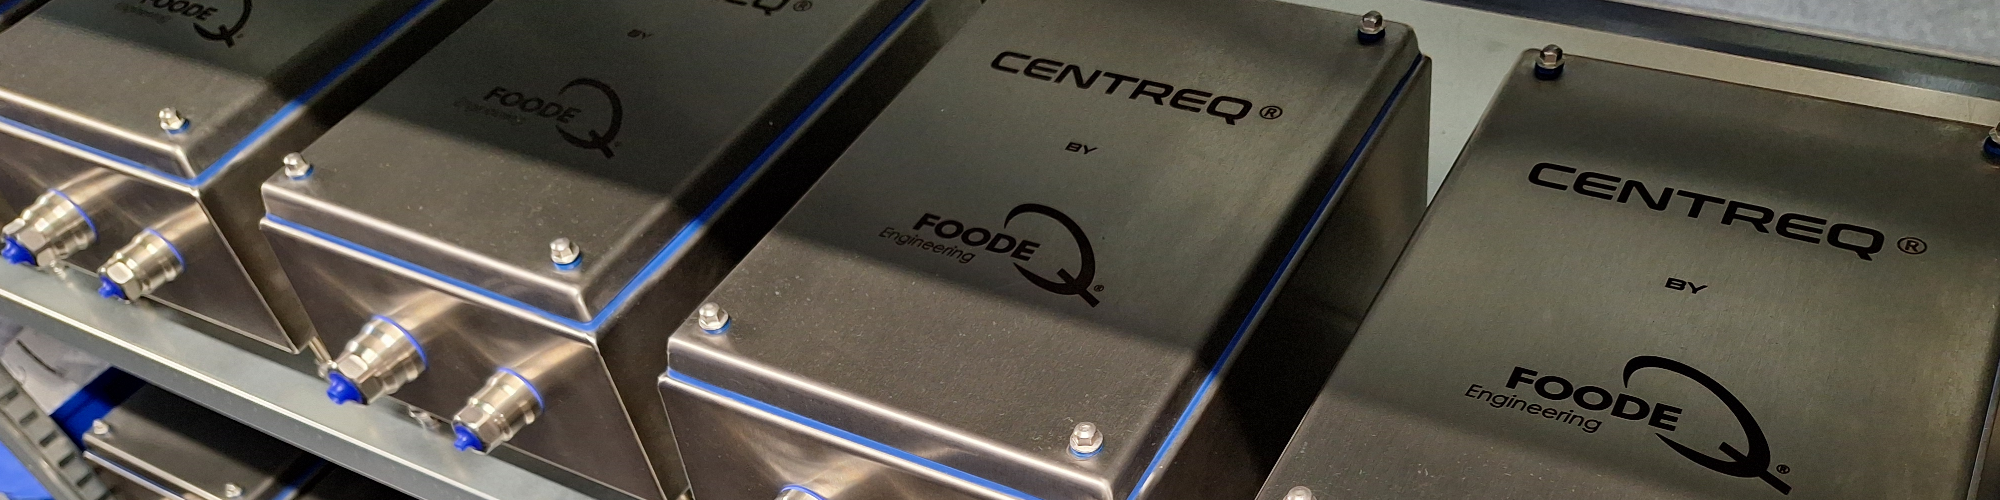 CentreQ by FoodeQ